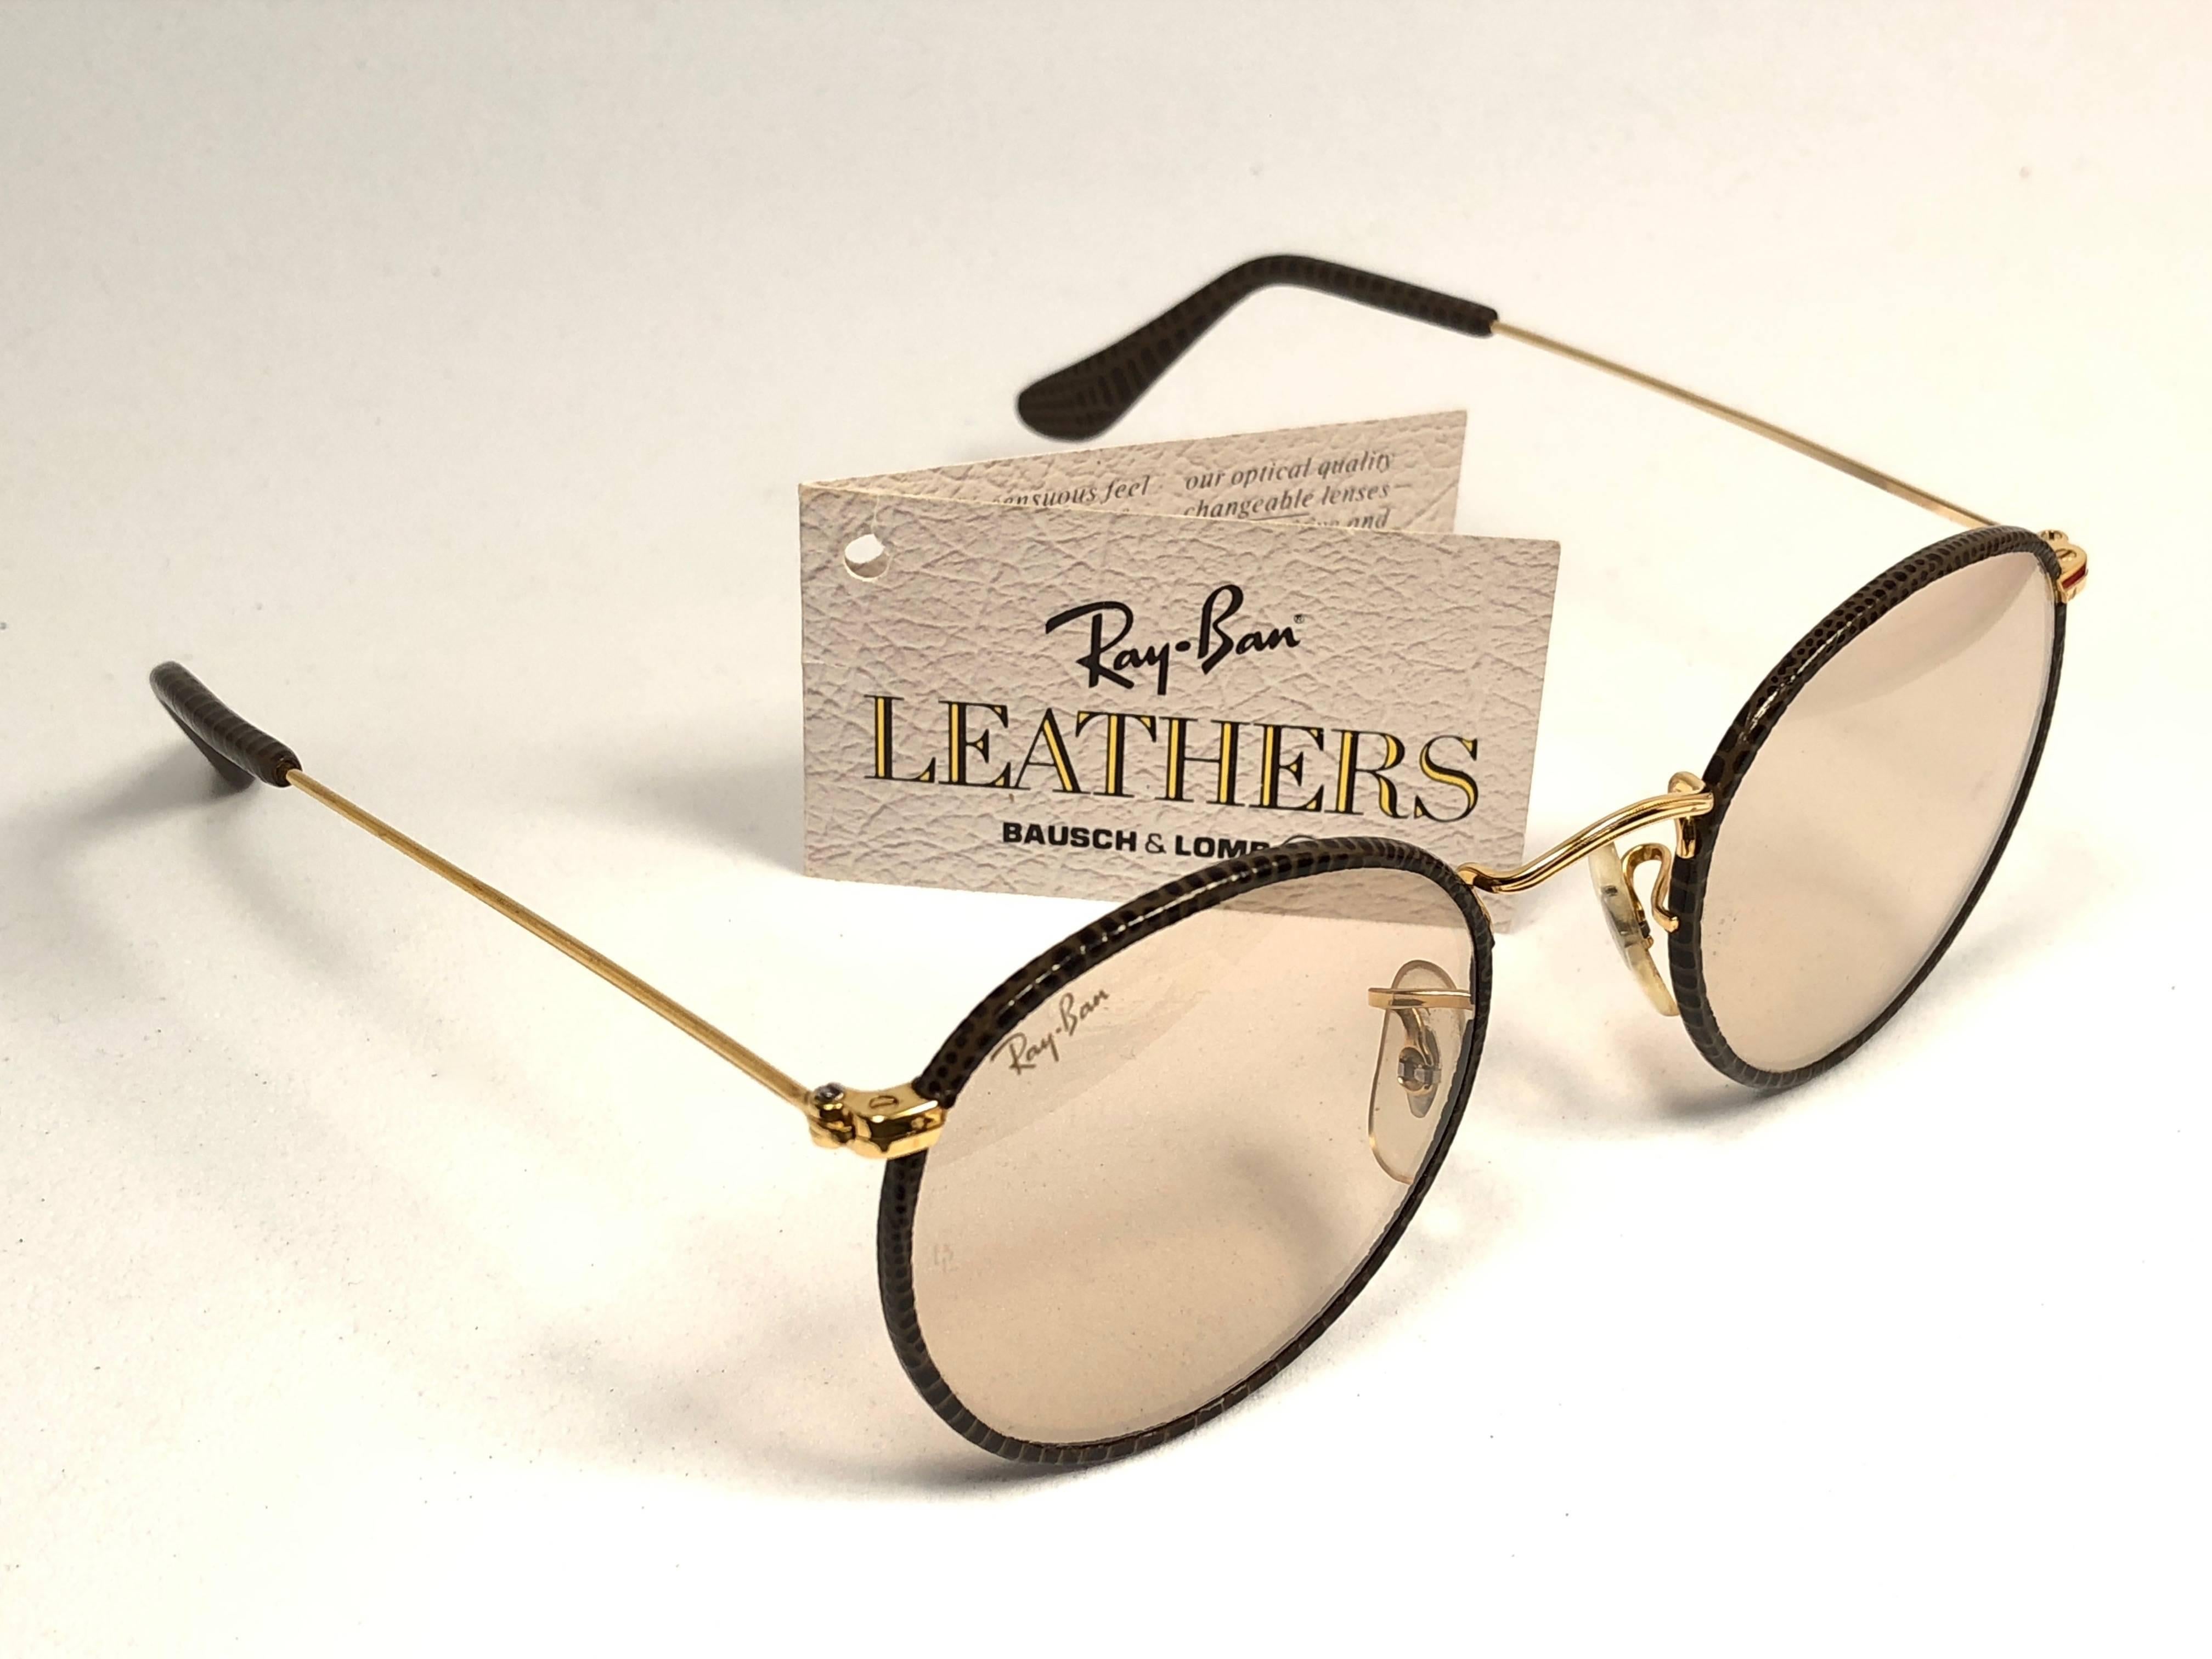 New Vintage Ray Ban black leather with gold metal combination frame sporting light brown lenses.
Comes with its original Ray Ban B&L case. Please notice this item may show minor sign of wear due to storage.  
Rare and hard to find in this new, never